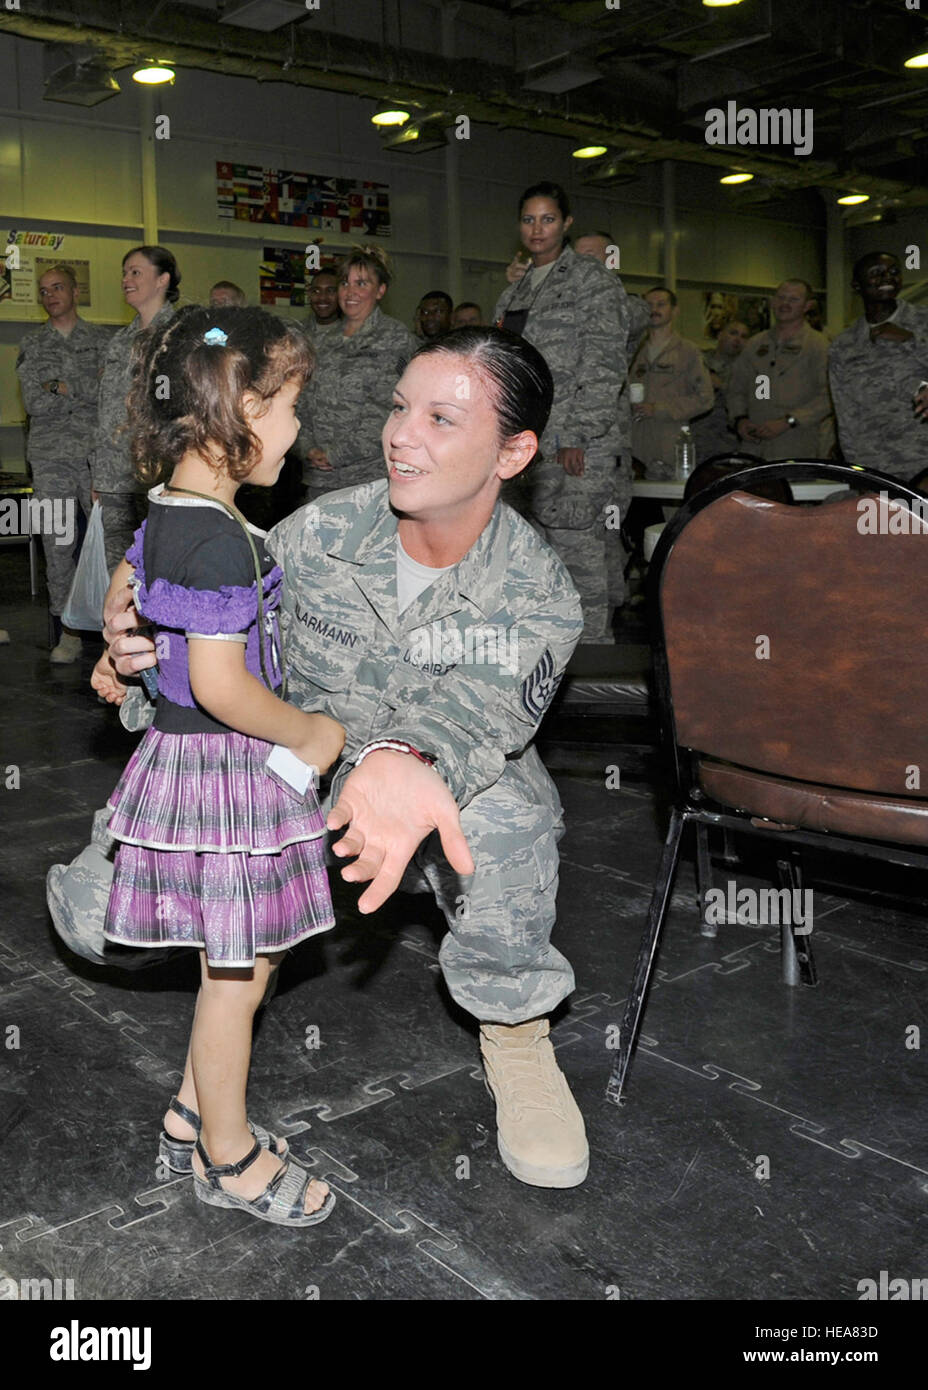 Technical Sgt. Aimee Klarmann, 332nd Expeditionary Medical Group, greets an Iraqi girl during Iraqi Kids Day at Joint Base Balad, Iraq, June 19. This was the second Iraqi Kids Day for Klarmann. Iraqi Kids Day serves as part of the ongoing base effort to spread goodwill to the local community. Over 70 children from local villages were bussed on base to play games, share culture and to have a day of fun. : Senior Airman Matthew Coleman-Foster) Stock Photo